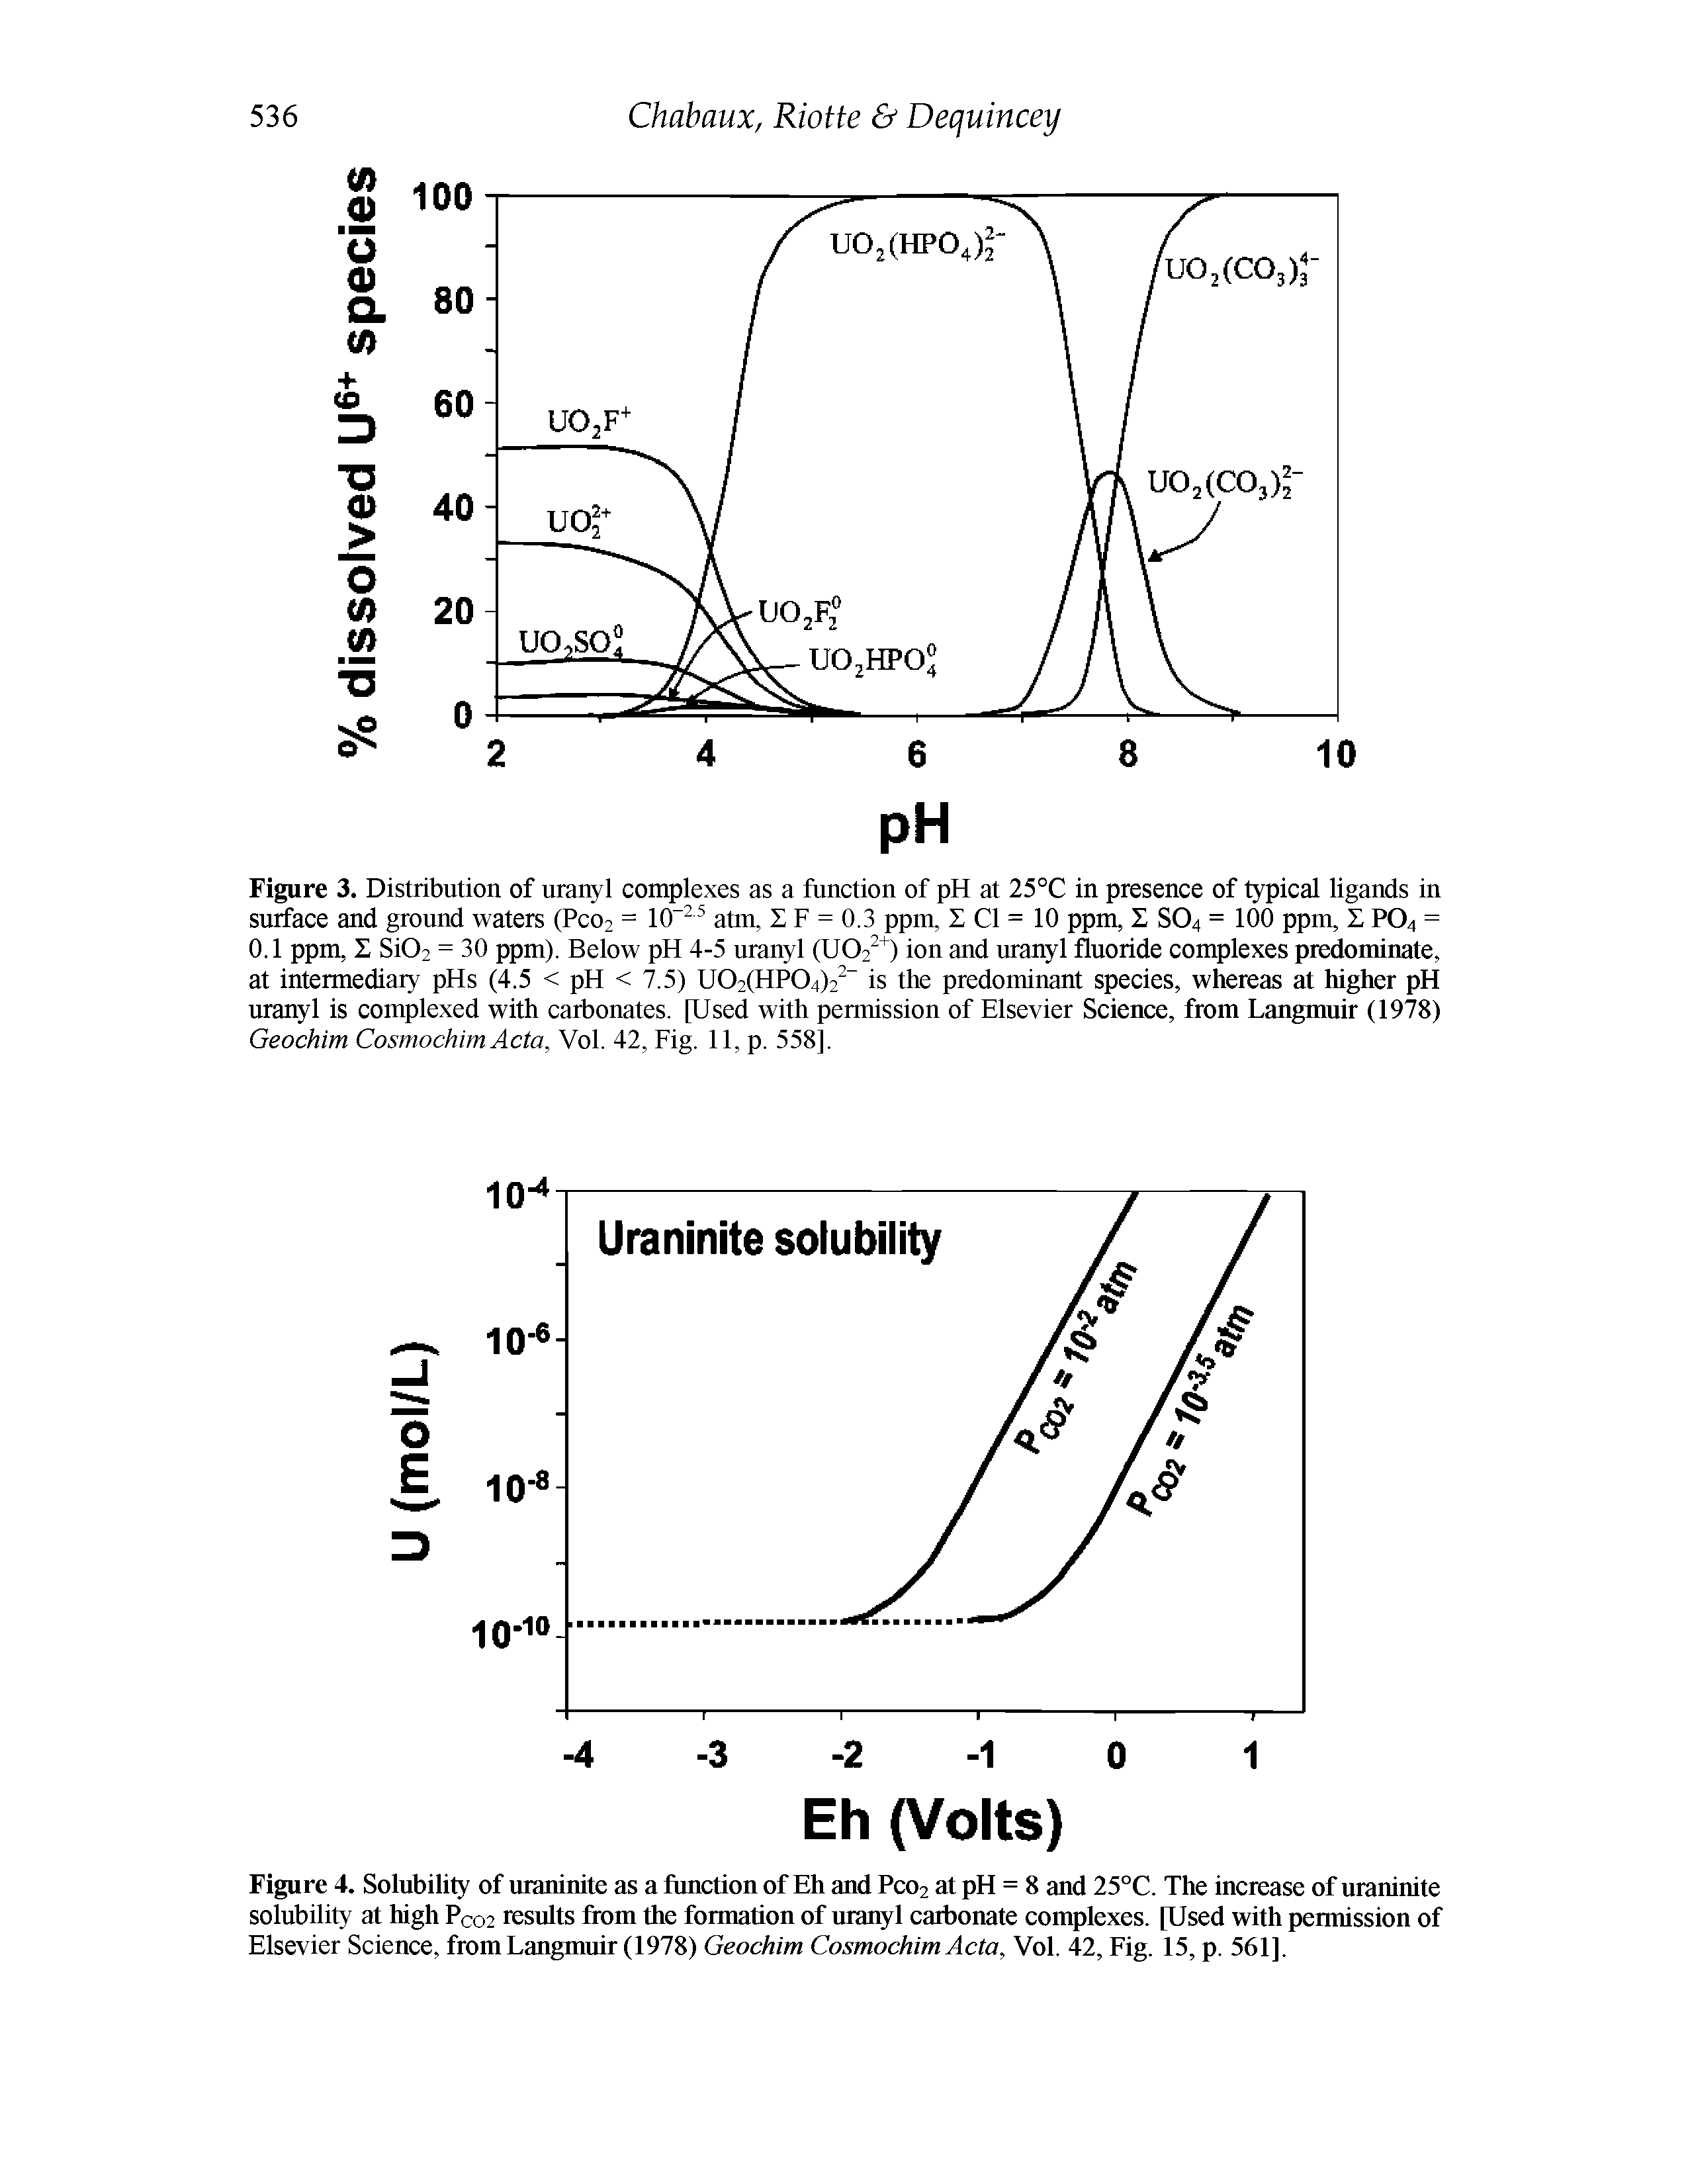 Figure 4. Solubility of uraninite as a function of Eh and PCO2 at pH = 8 and 25°C. The increase of uraninite solubility at high Pco2 results from the formation of uranyl carbonate complexes. [Used with permission of Elsevier Science, from Langmuir (1978) Geochim Cosmochim Acta, Vol. 42, Fig. 15, p. 561].